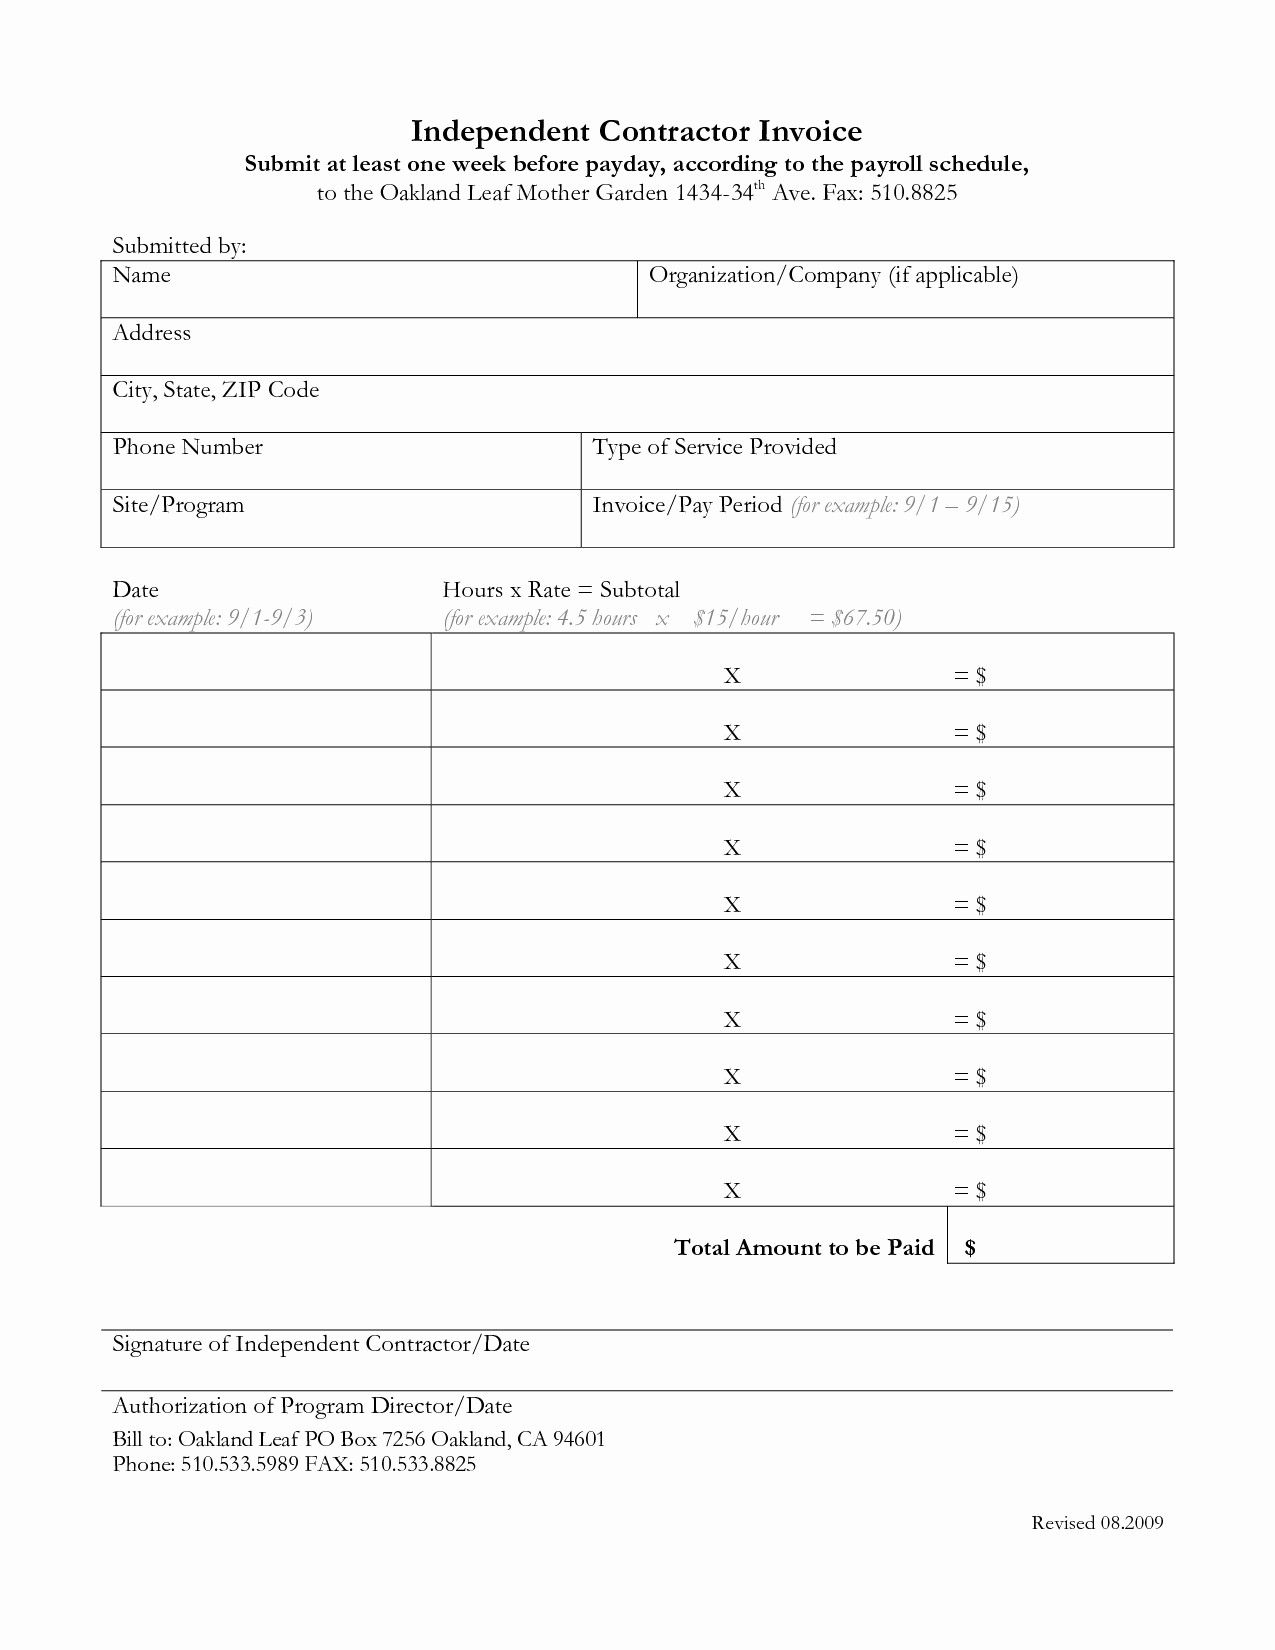 Contractor Invoice Template Word Lovely Independent Contractor Invoice Template Free